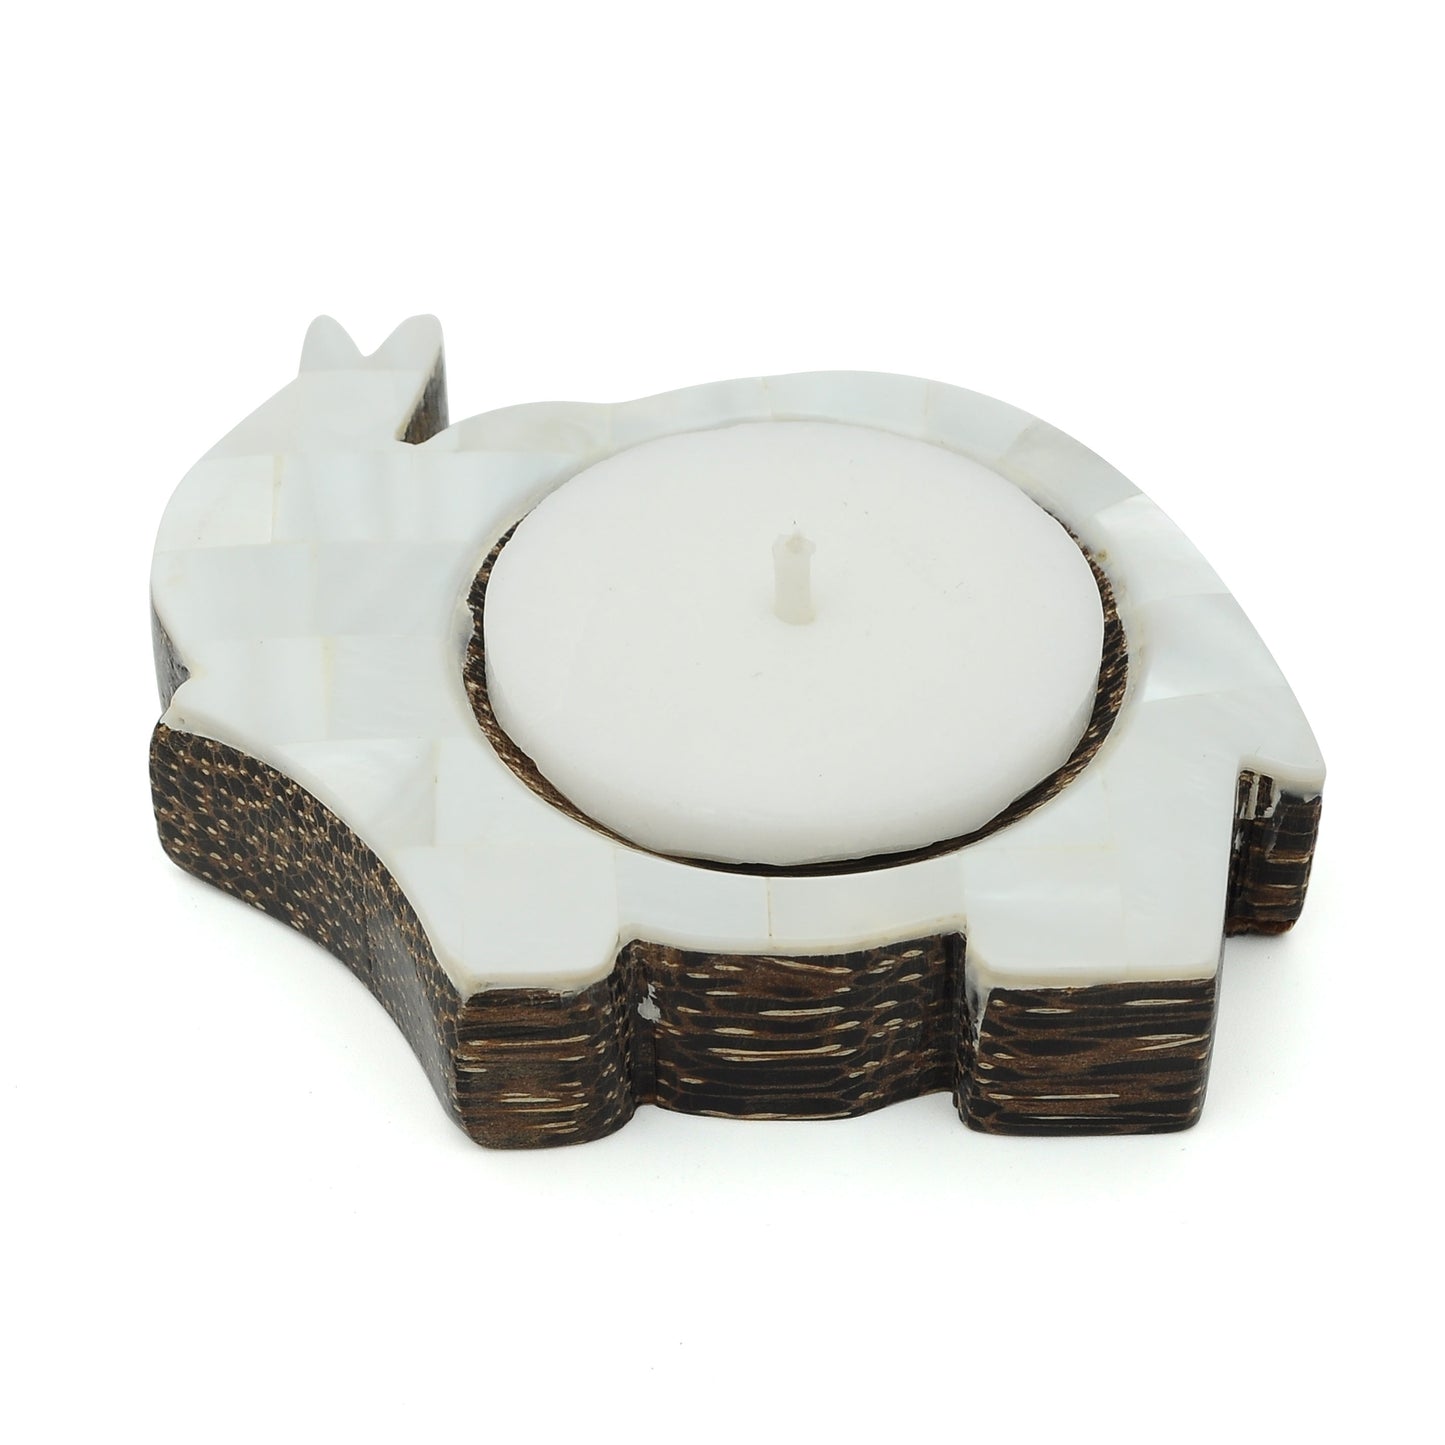 Elephant Shaped Palm Wood Tealight Candle Holder White Mother of Pearl Inlay